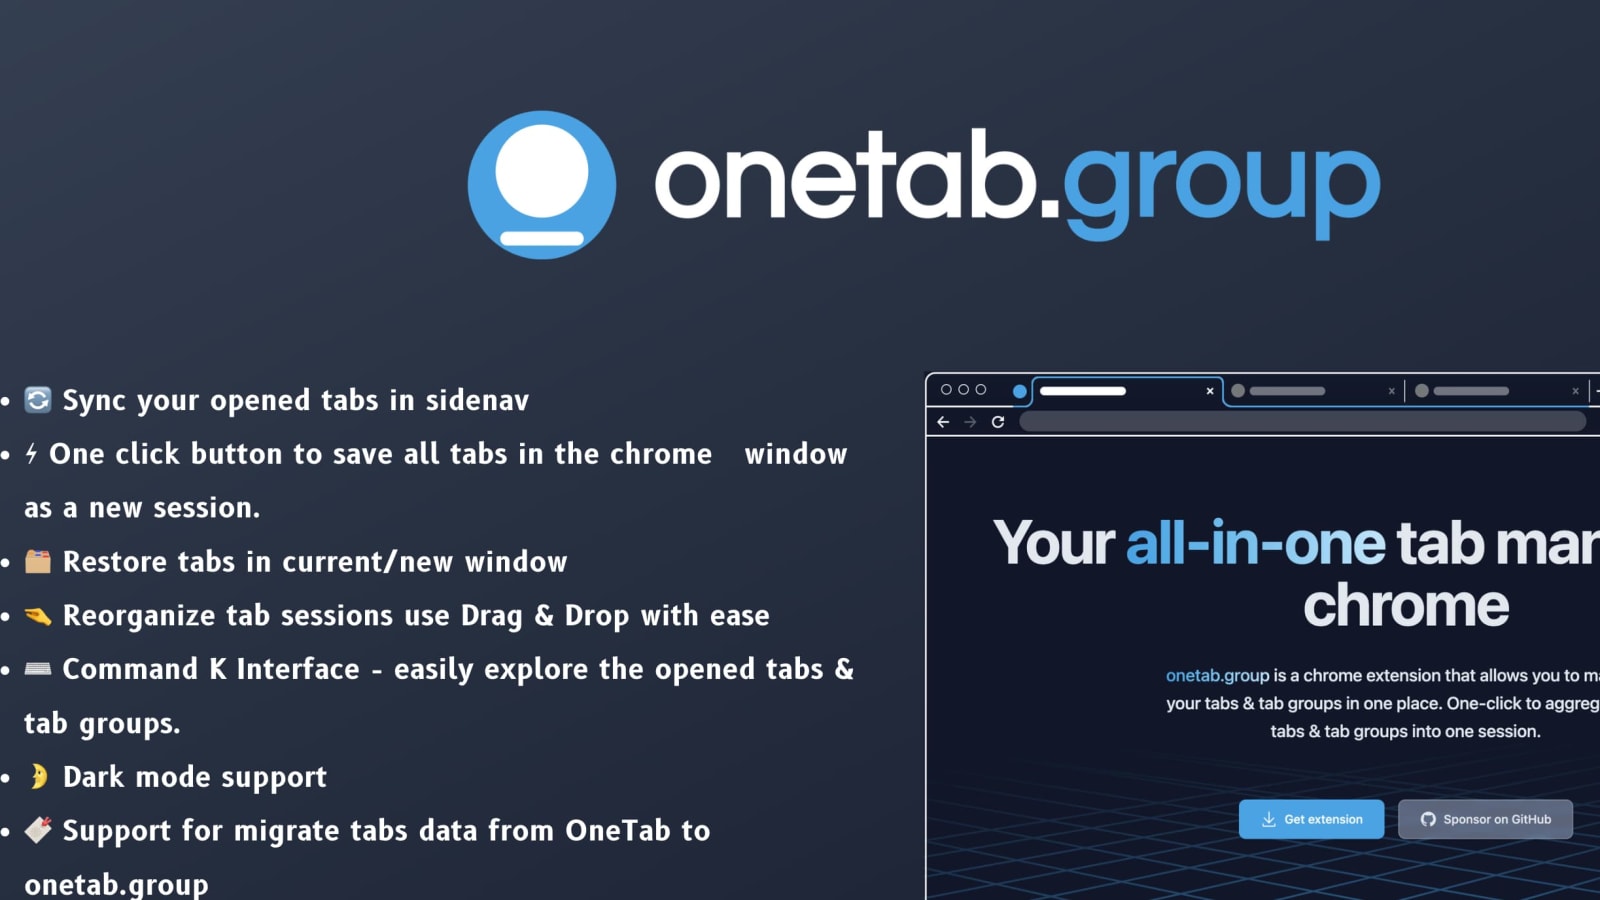 OneTab Extension is not fully functional